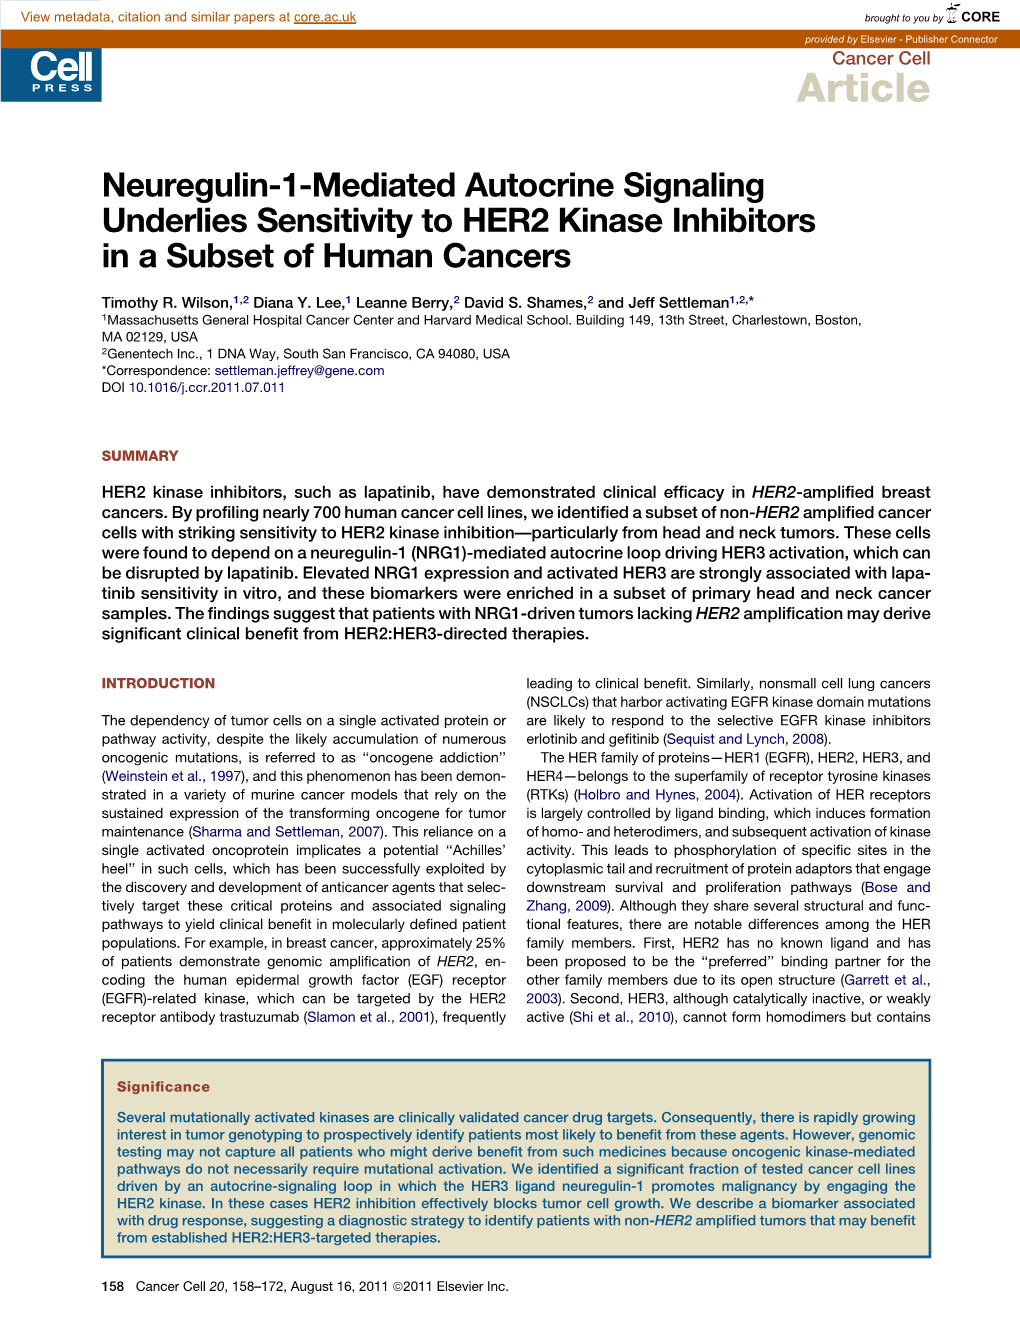 Neuregulin-1-Mediated Autocrine Signaling Underlies Sensitivity to HER2 Kinase Inhibitors in a Subset of Human Cancers